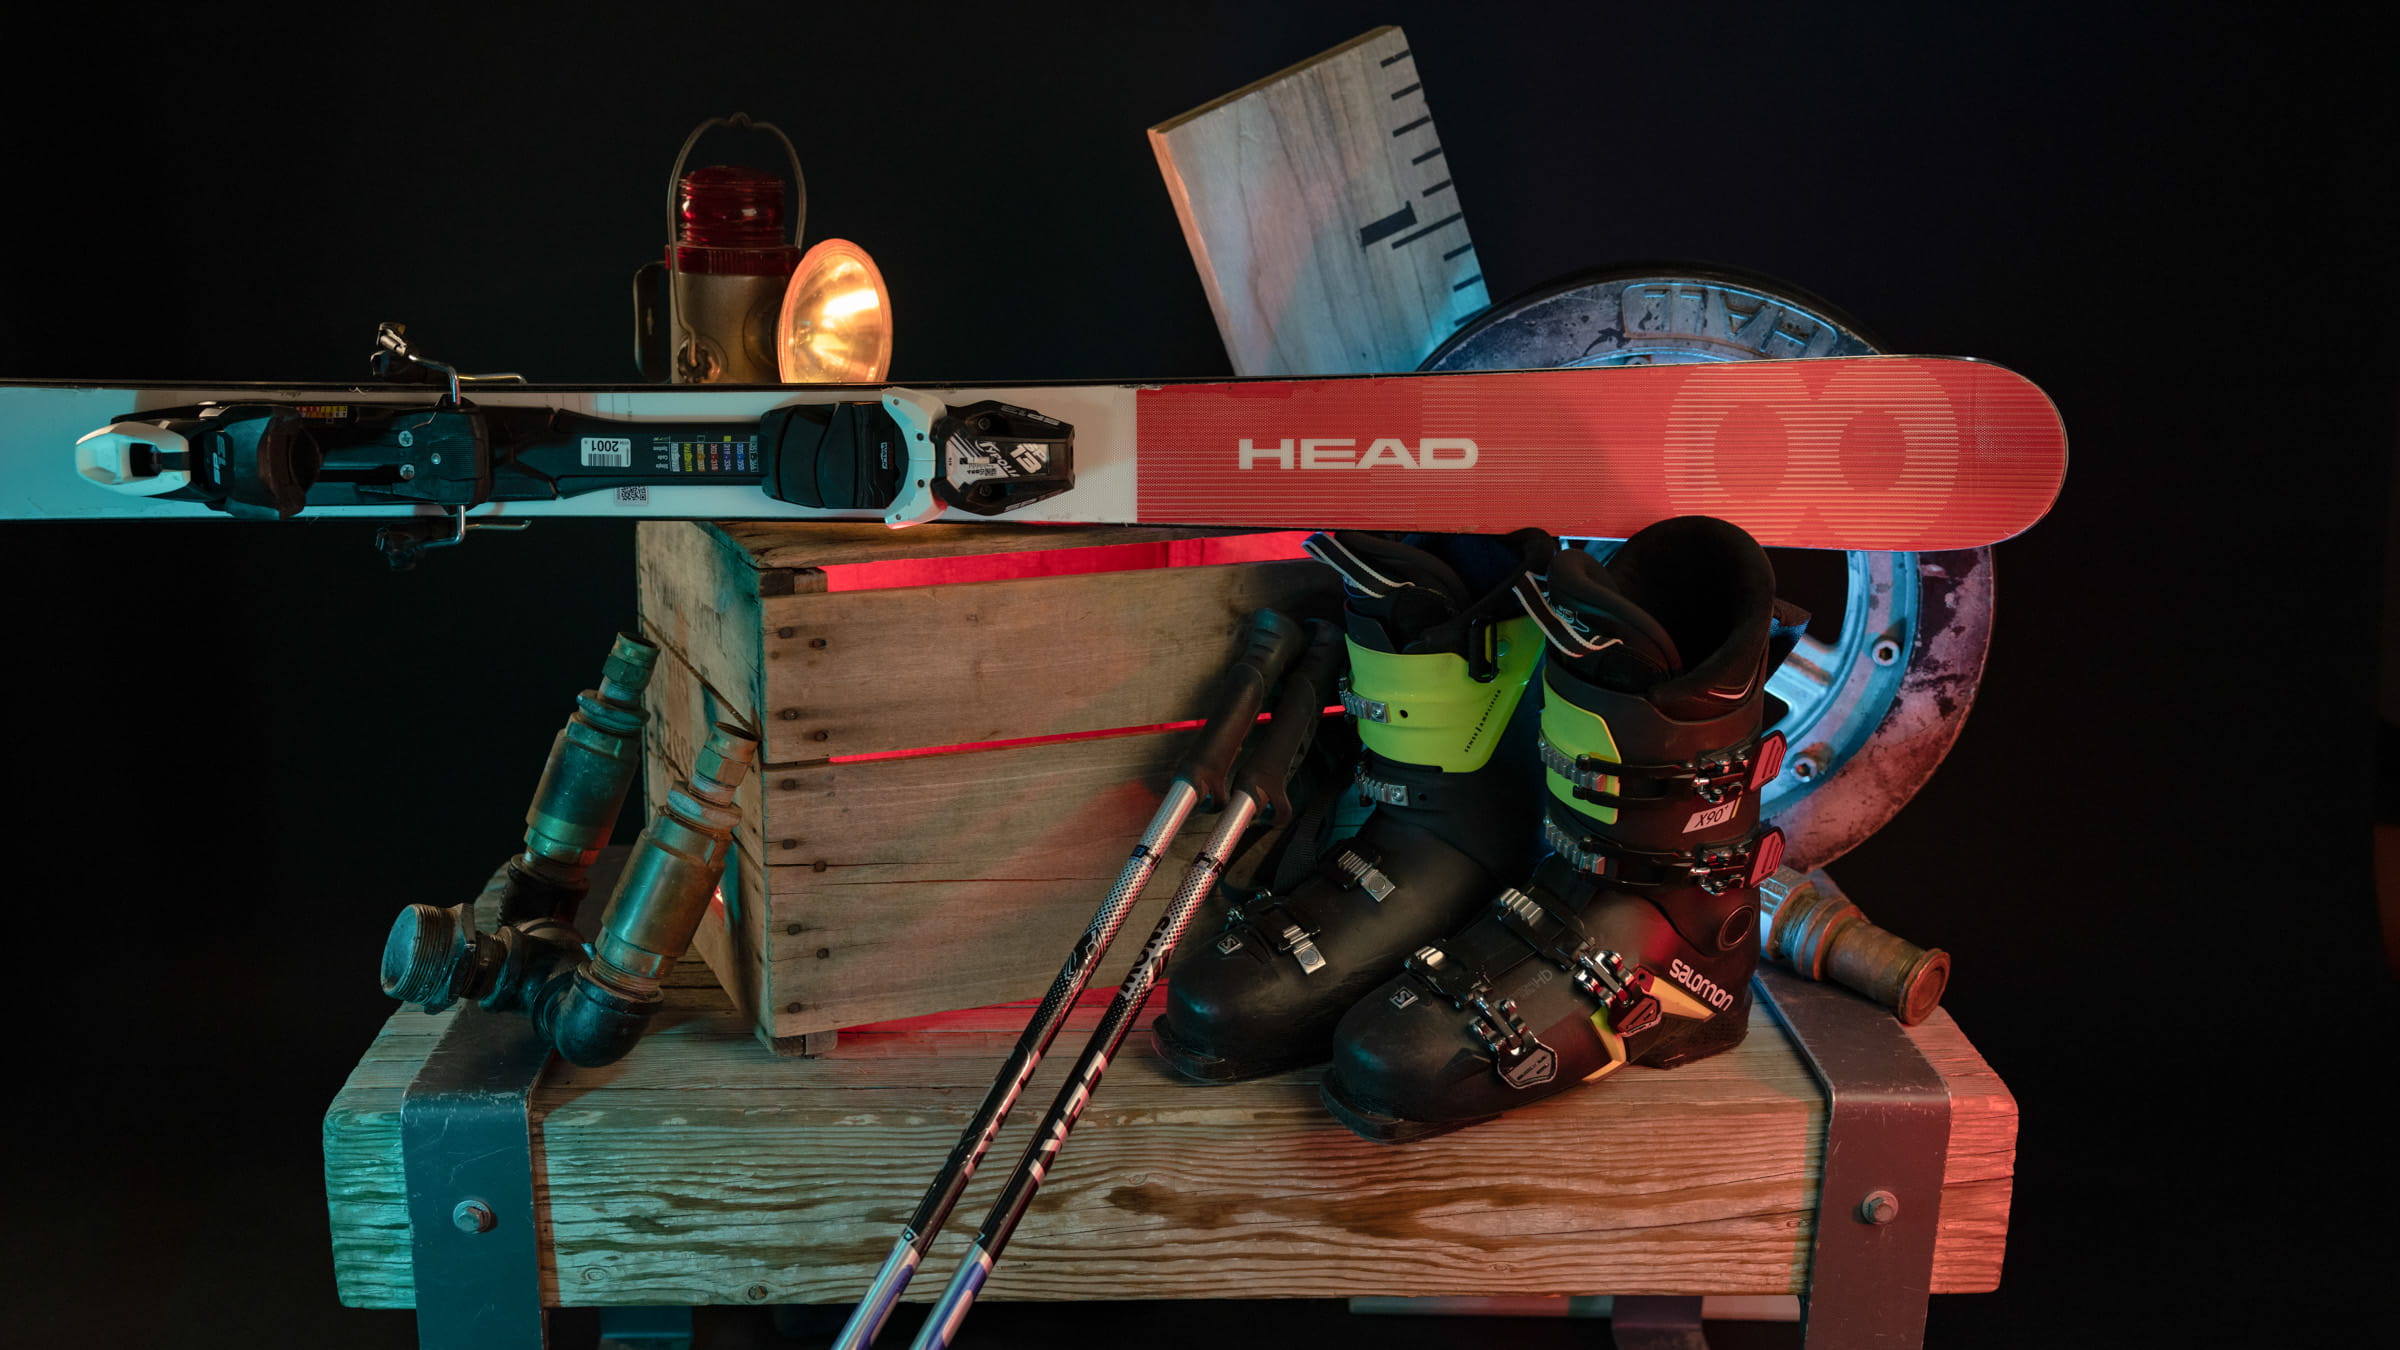 Ski boots, poles, and skis displayed upon a wooden box